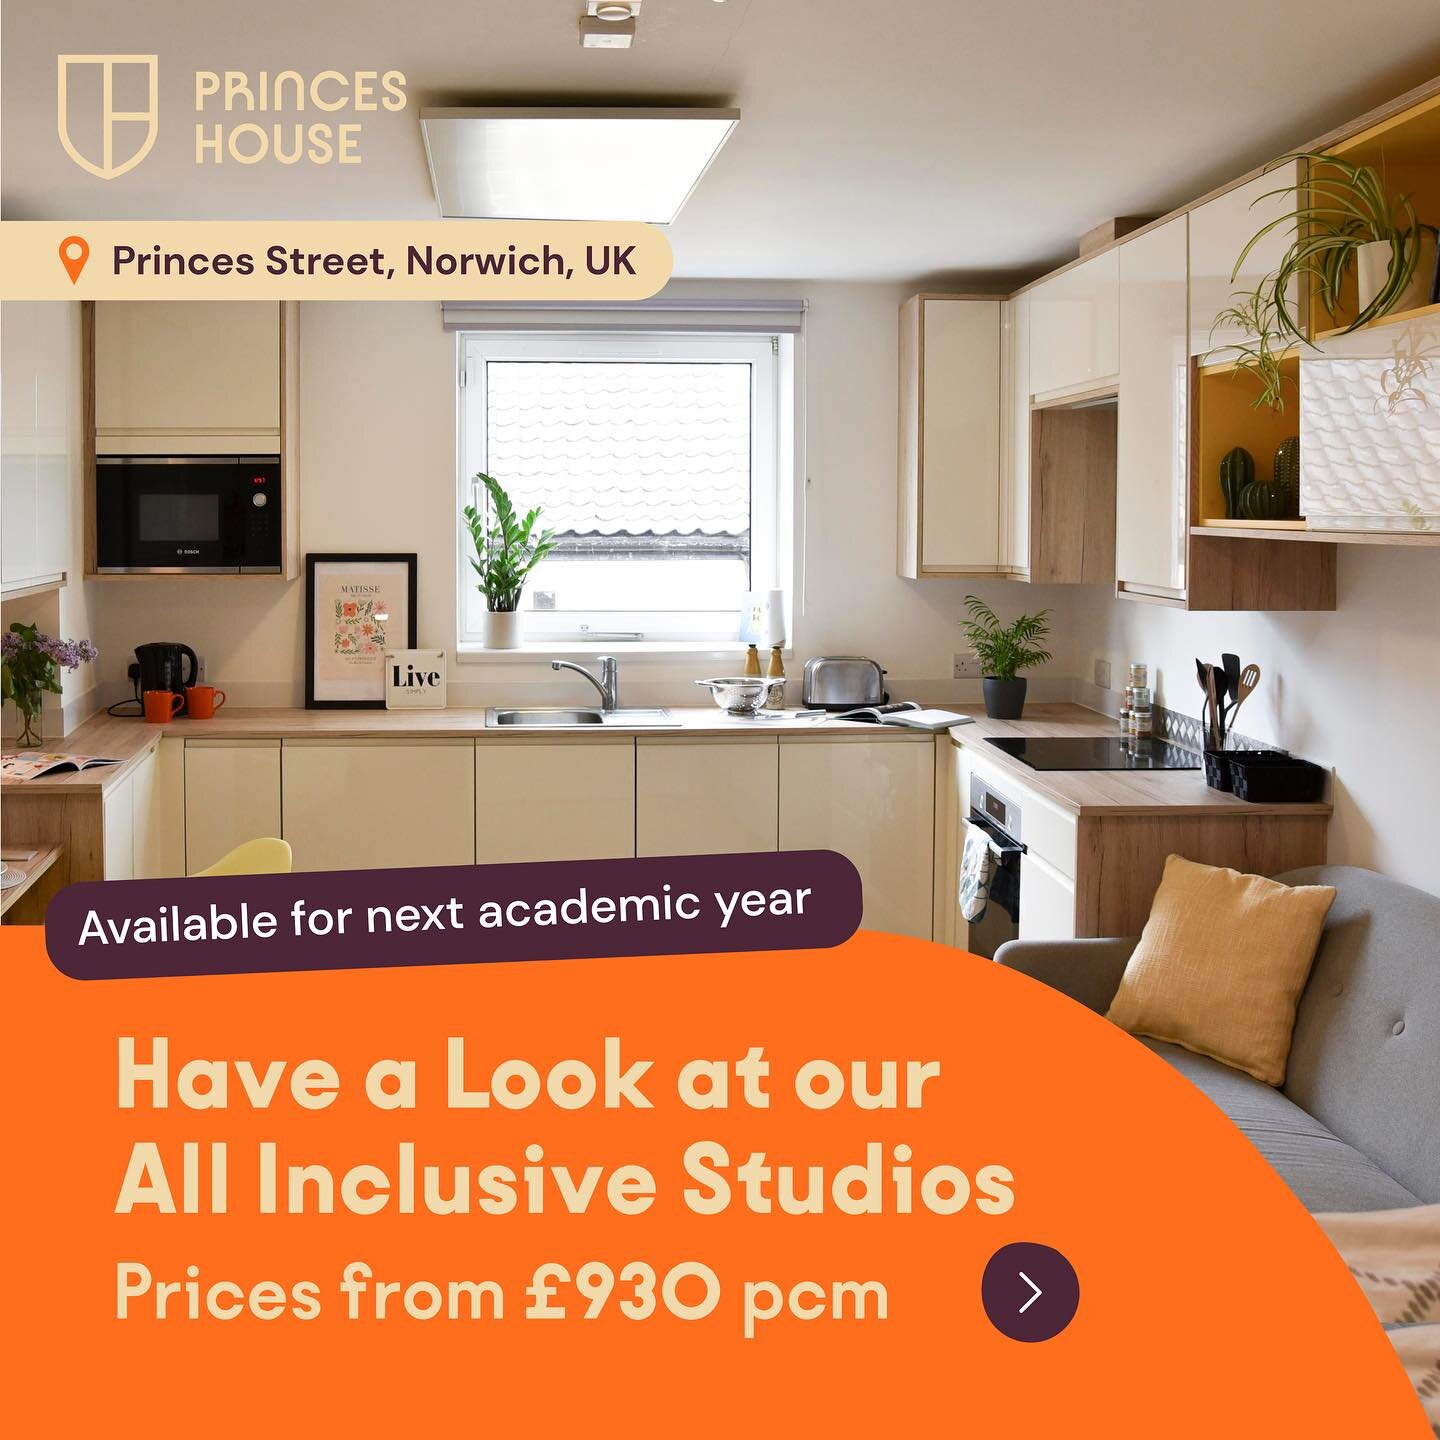 Situated in The Creative Heart Of Norwich we have a range of studios to suit your needs and your budget.  If you prefer an apartment we have those too. Please contact us for more information. 📩
We Are Unique So Are You.

#studentaccommodation #stude